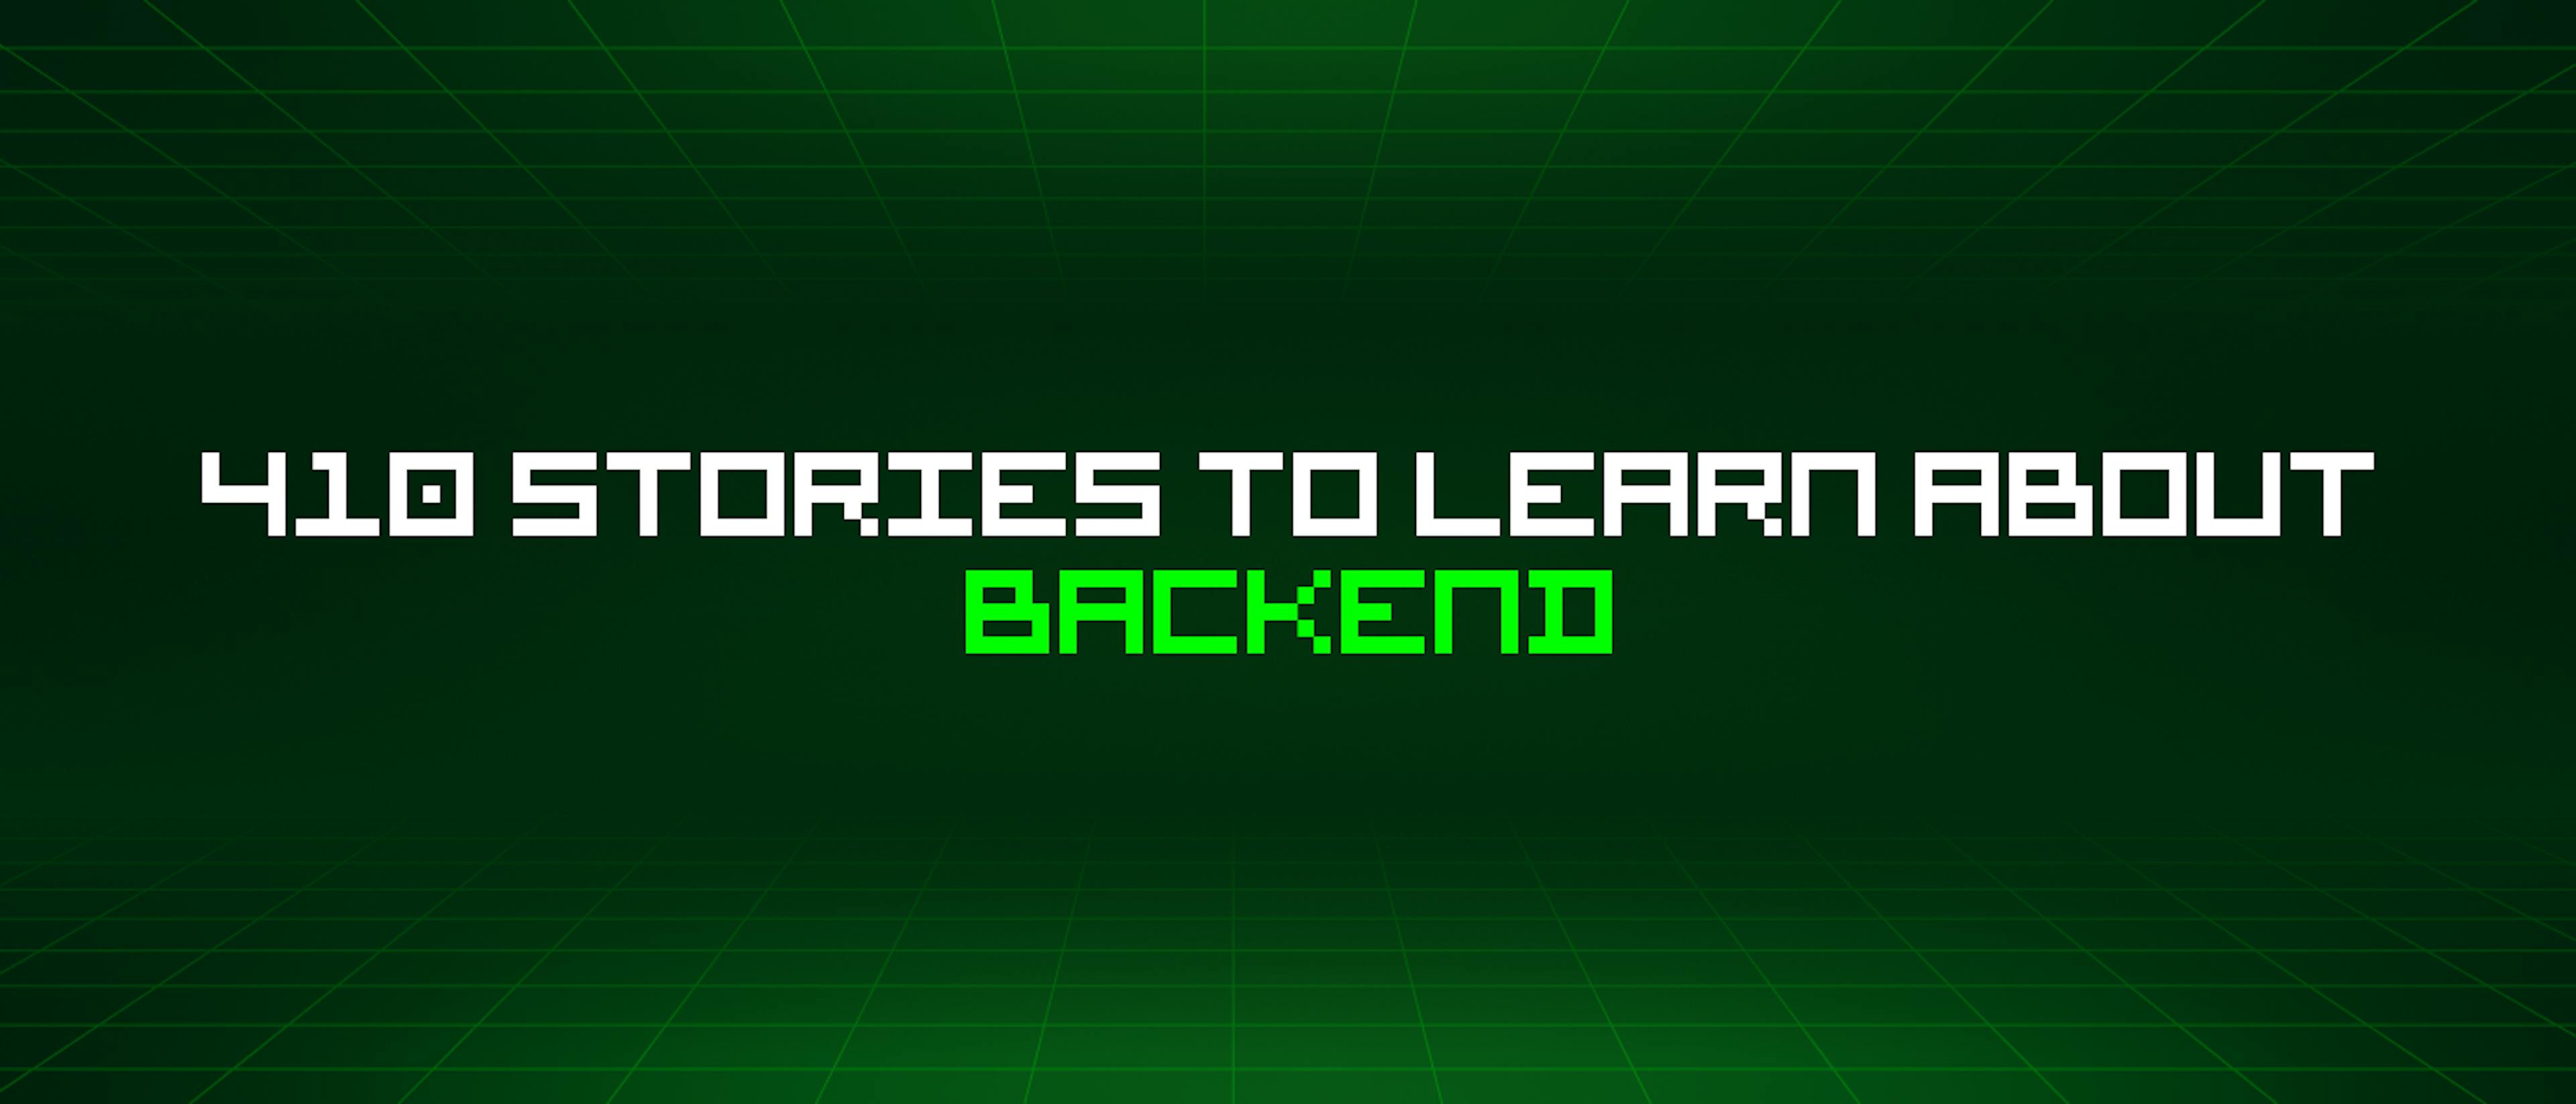 featured image - 410 Stories To Learn About Backend